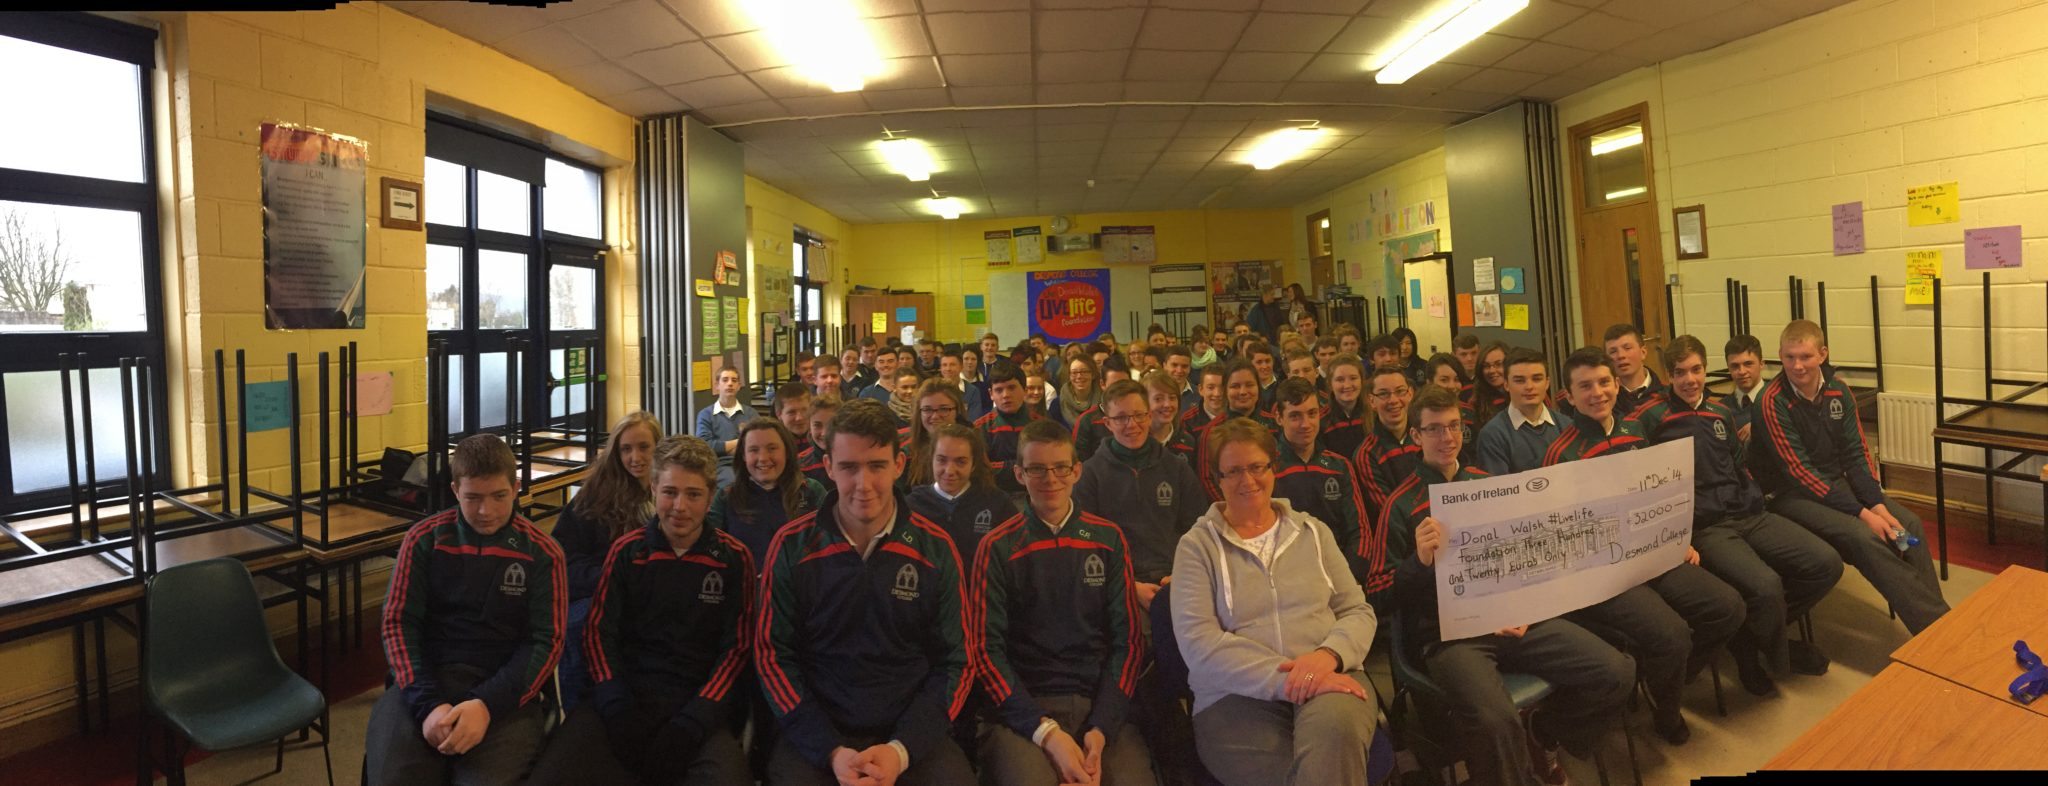 Donal Walsh Anti-Suicide Talk by his mother, Elma Walsh on 11th December 2014 at Desmond College : #LiveLife Foundation